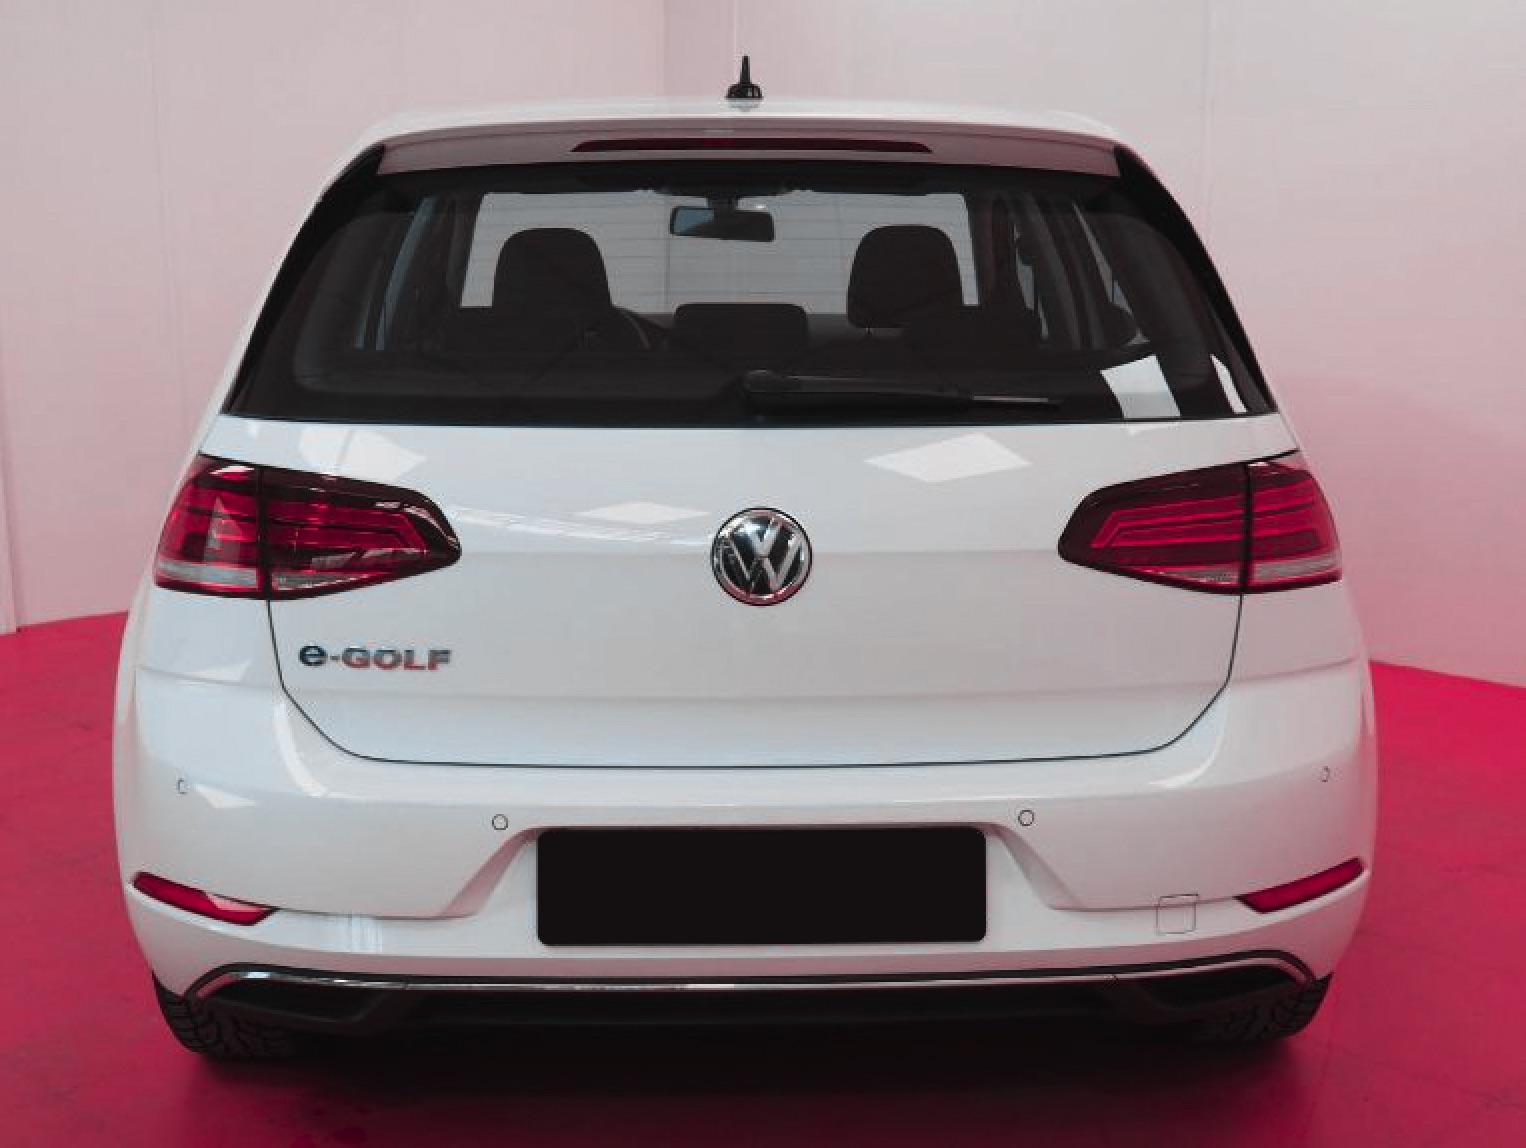 Volkswagen e-Golf - Electro 100kW/136HP - 36kWh battery - White - 16&quot; wheels - 12000 km - 2020.08.